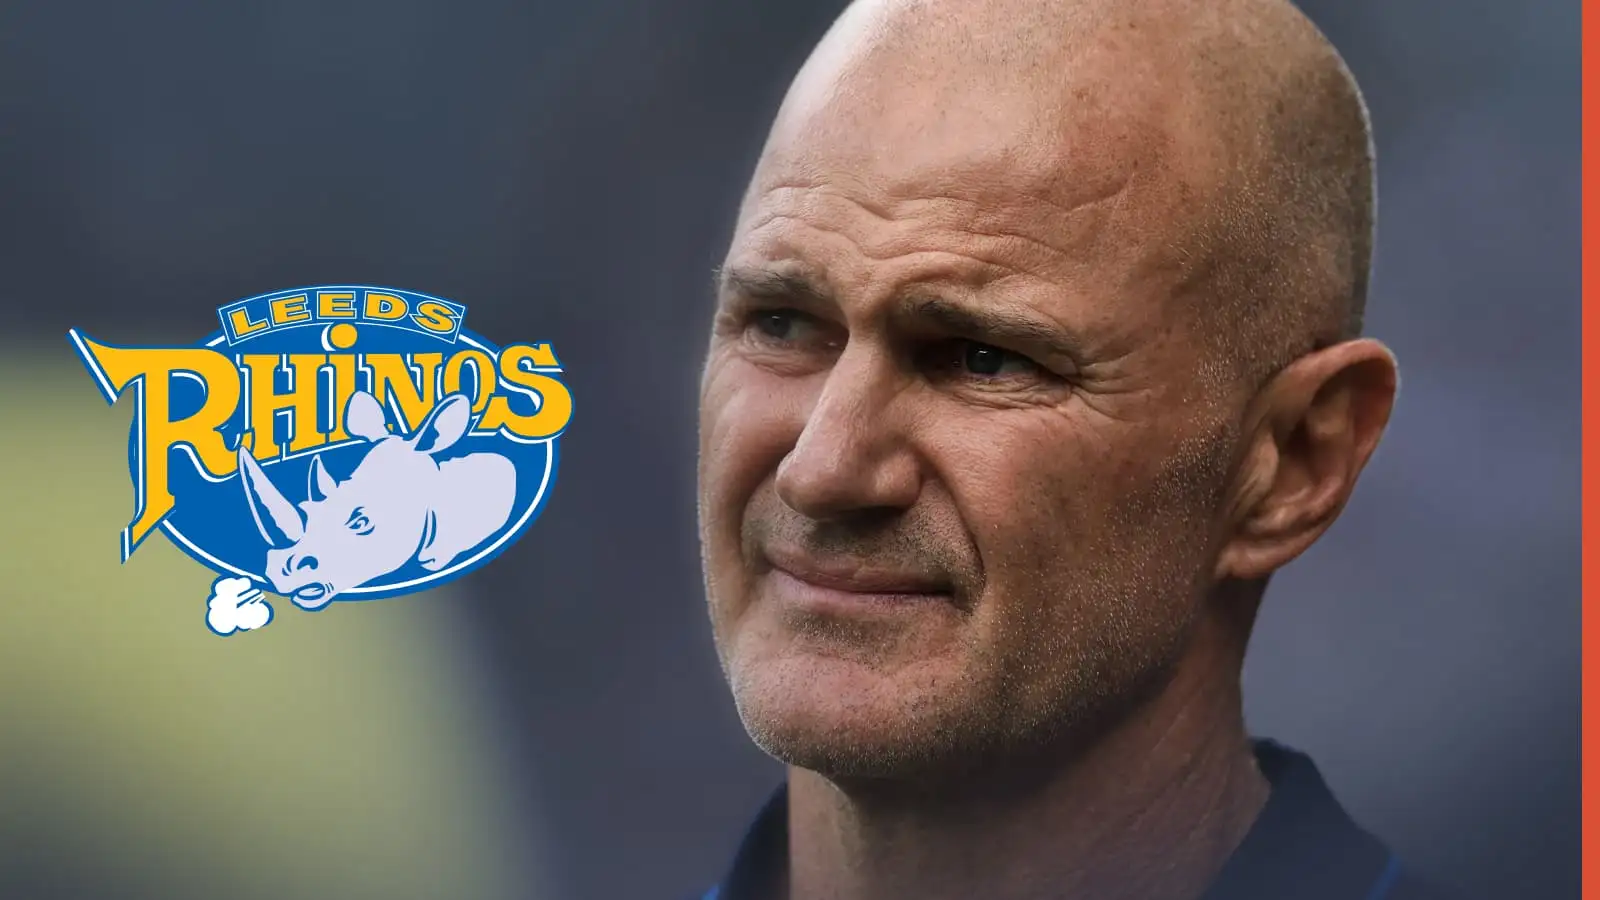 Brad Arthur lowdown: what Leeds Rhinos can expect from new coach including style, tactics